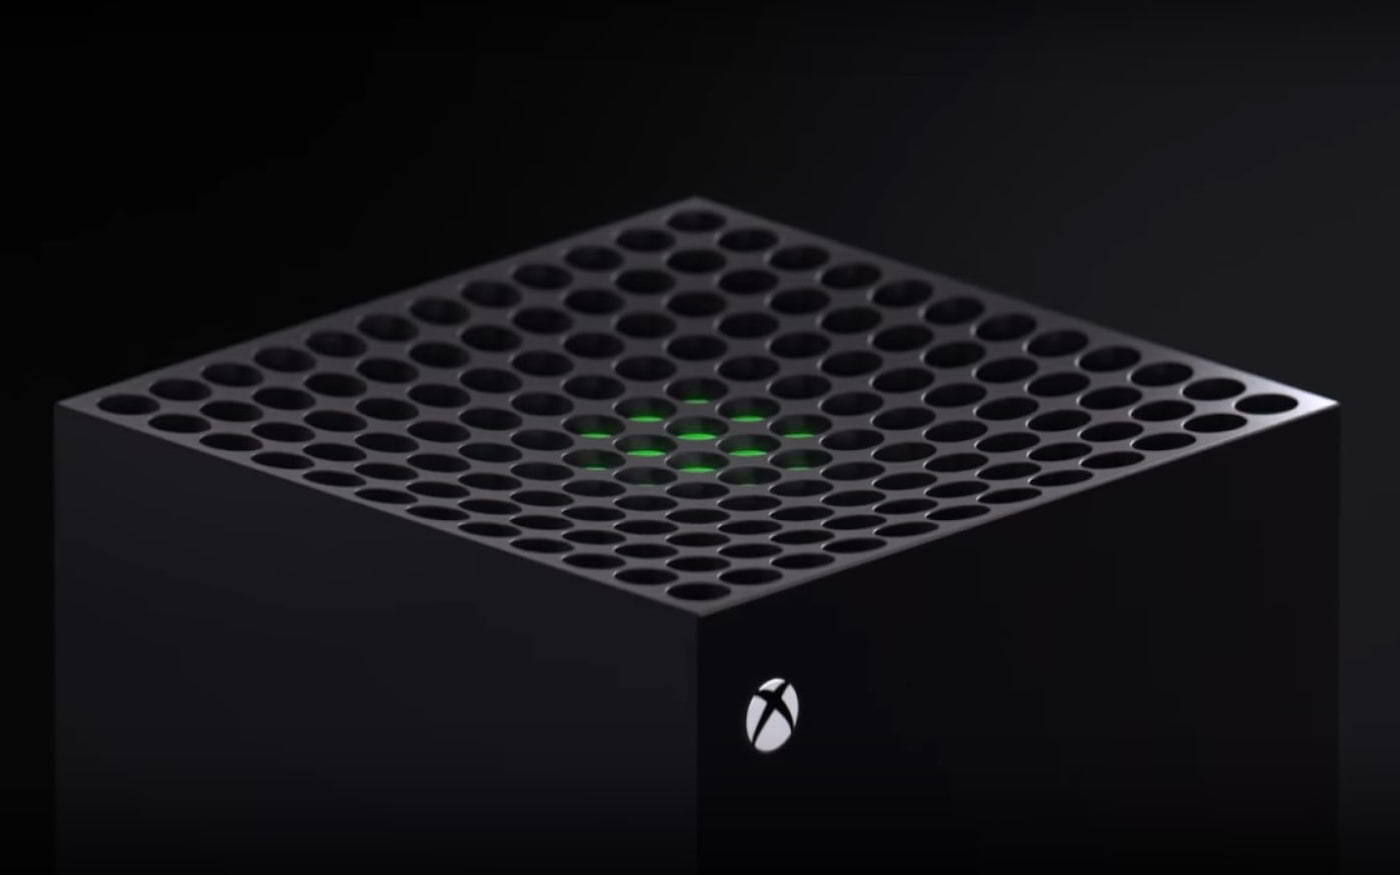 Xbox Series X will come with audio technology that promises immersion like never before